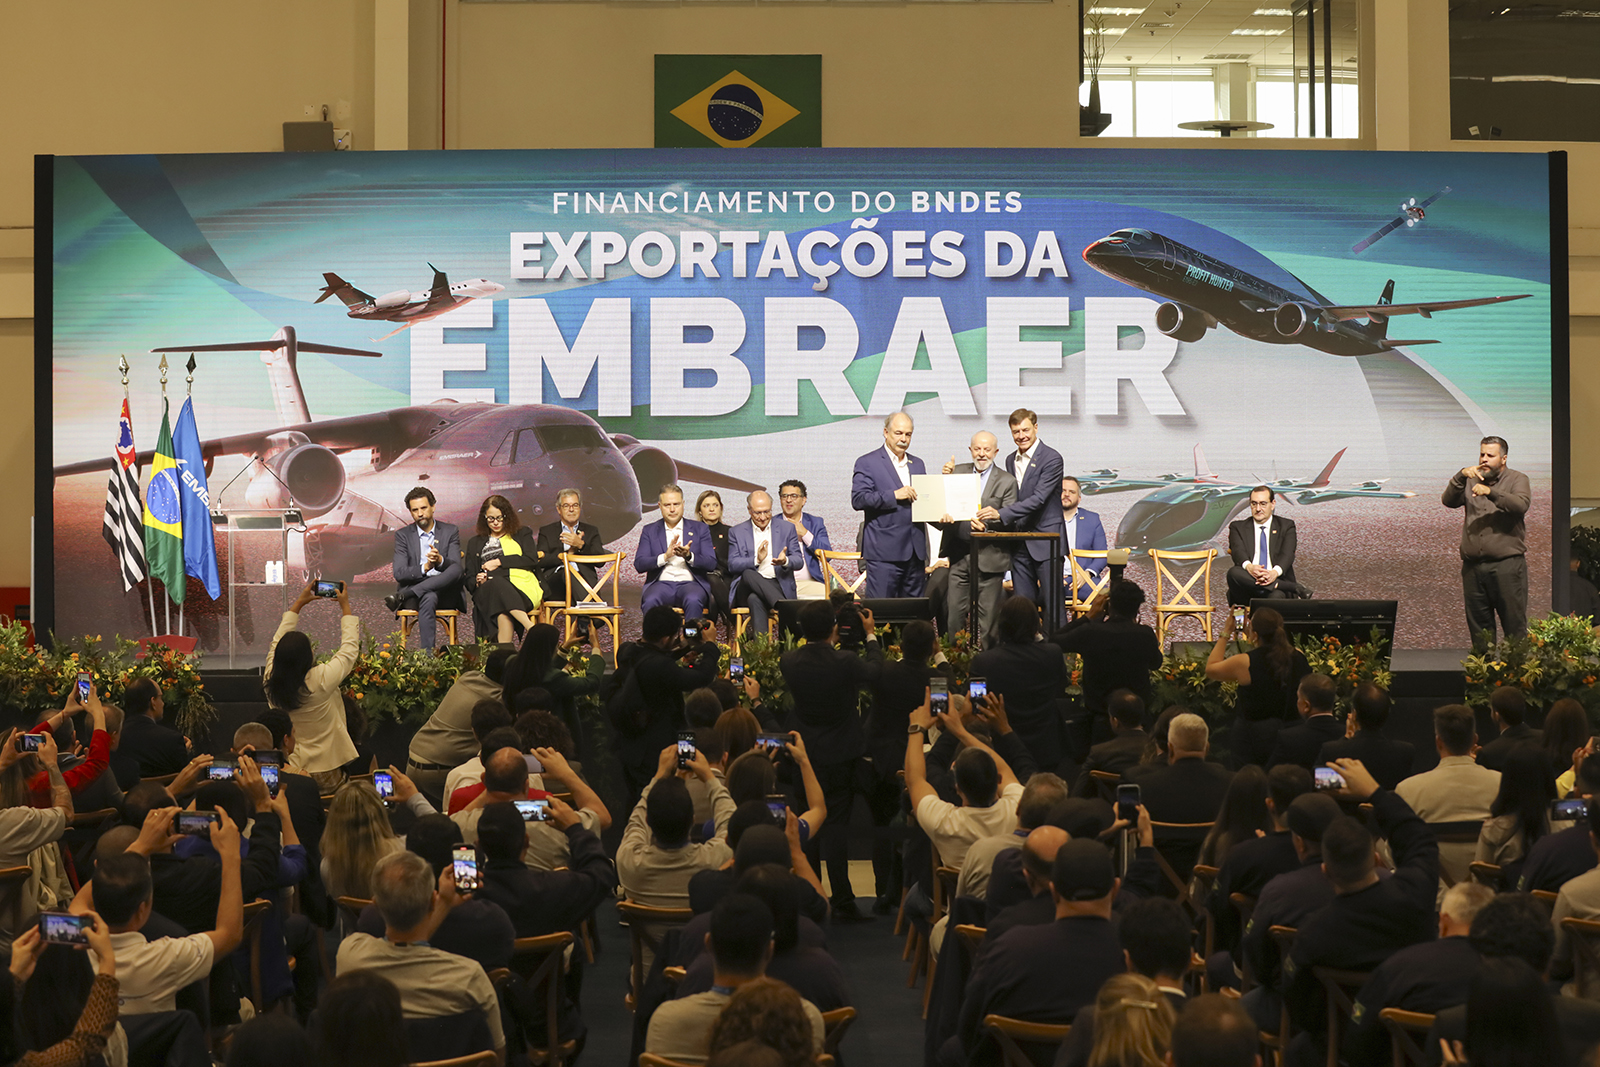 BNDES finances the export of 32 Embraer E175 jets to American Airlines